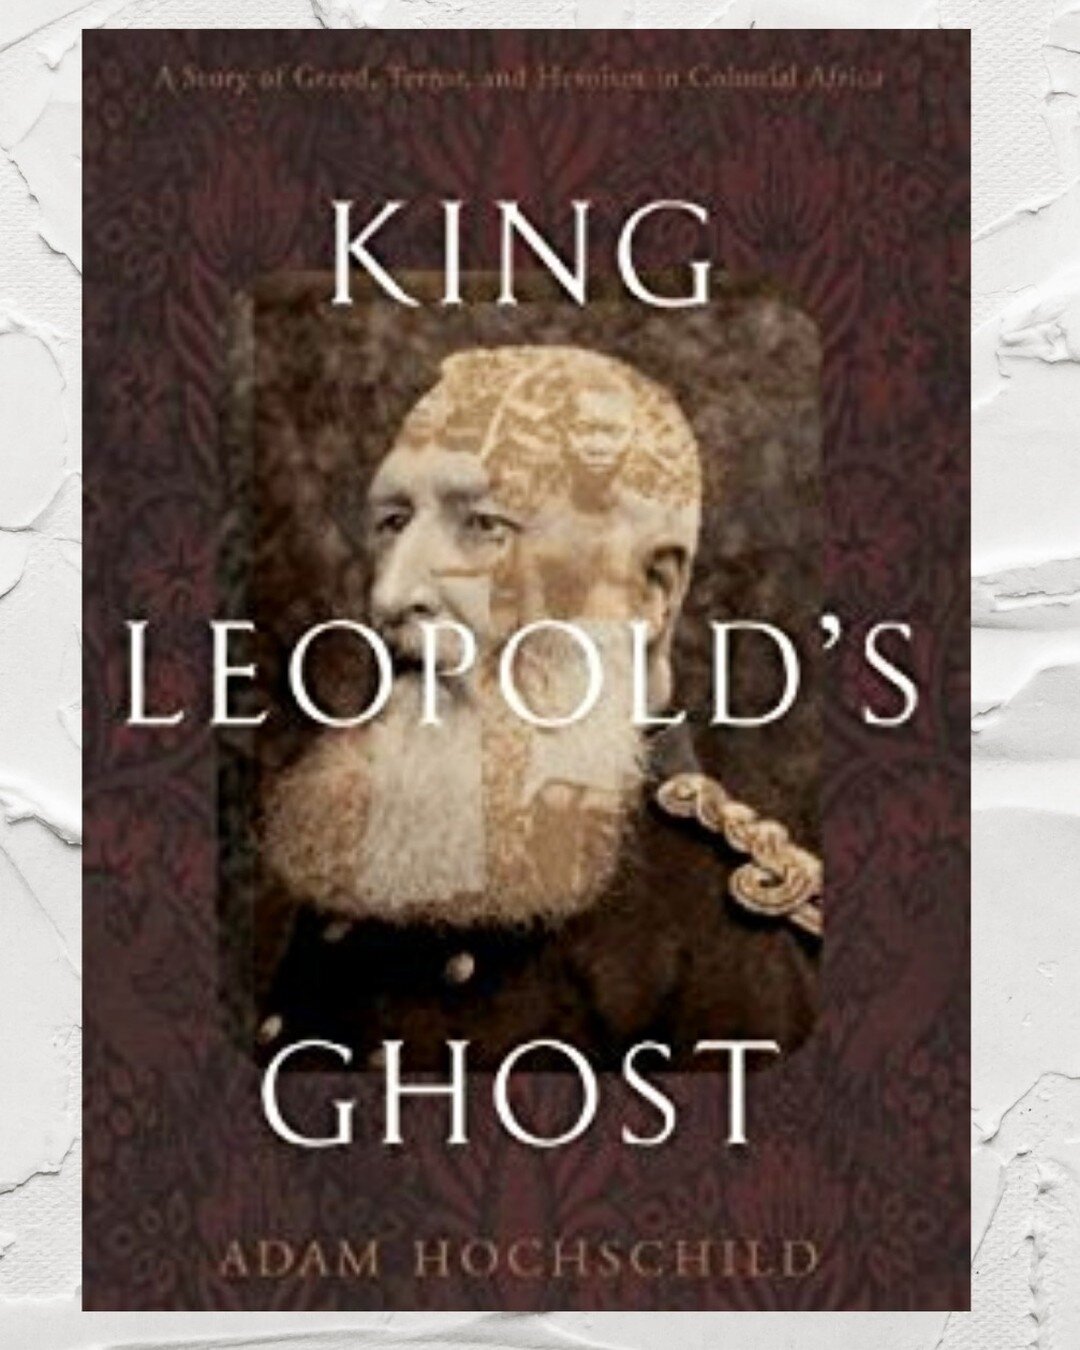 For the third day of Christmas, here's a book for history buffs and knowledge seekers.

Dark, poignant and ever engaging, Adam Hochschild&rsquo;s accessible and beautifully detailed history book delves into Belgium&rsquo;s King Leopold II&rsquo;s que